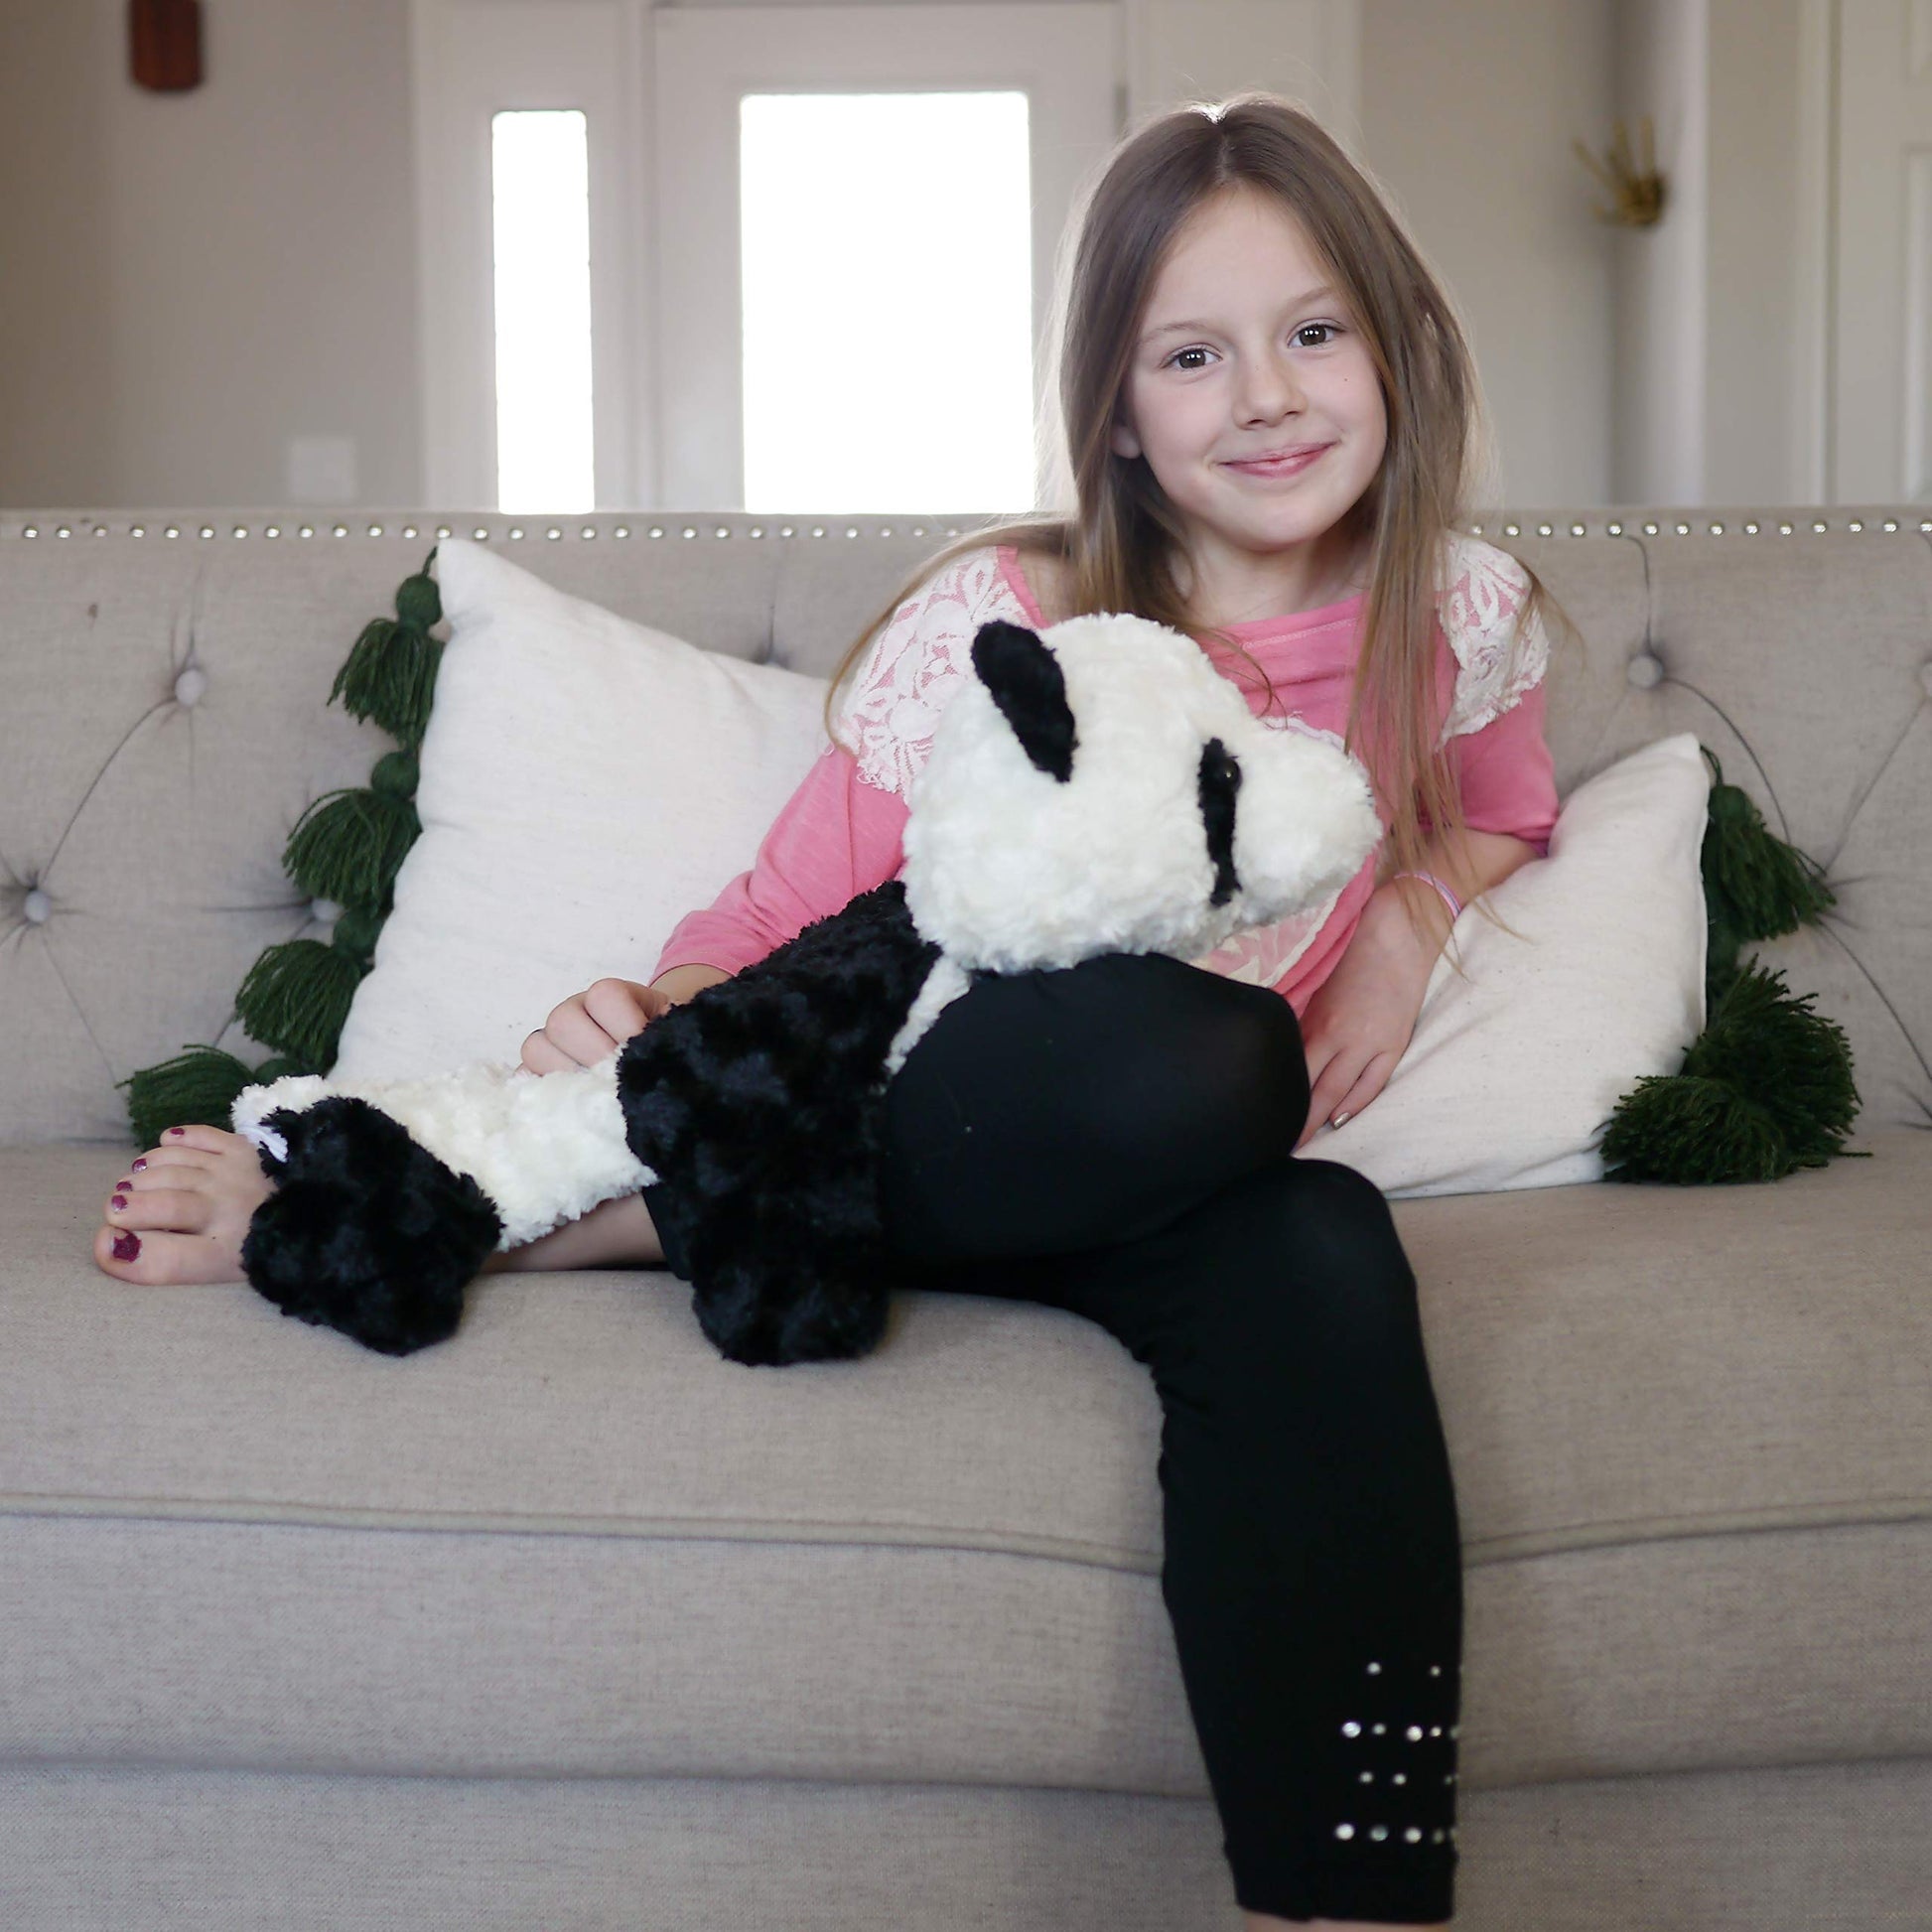 SENSORY4U Weighted Lap Blanket Pad for Kids Panda Bear 4 lbs Weighted Blanket - Washable - Perfect for Sensory Disorders Such as Autism, ADHD, Anxiety, Stress and Poor Concentration